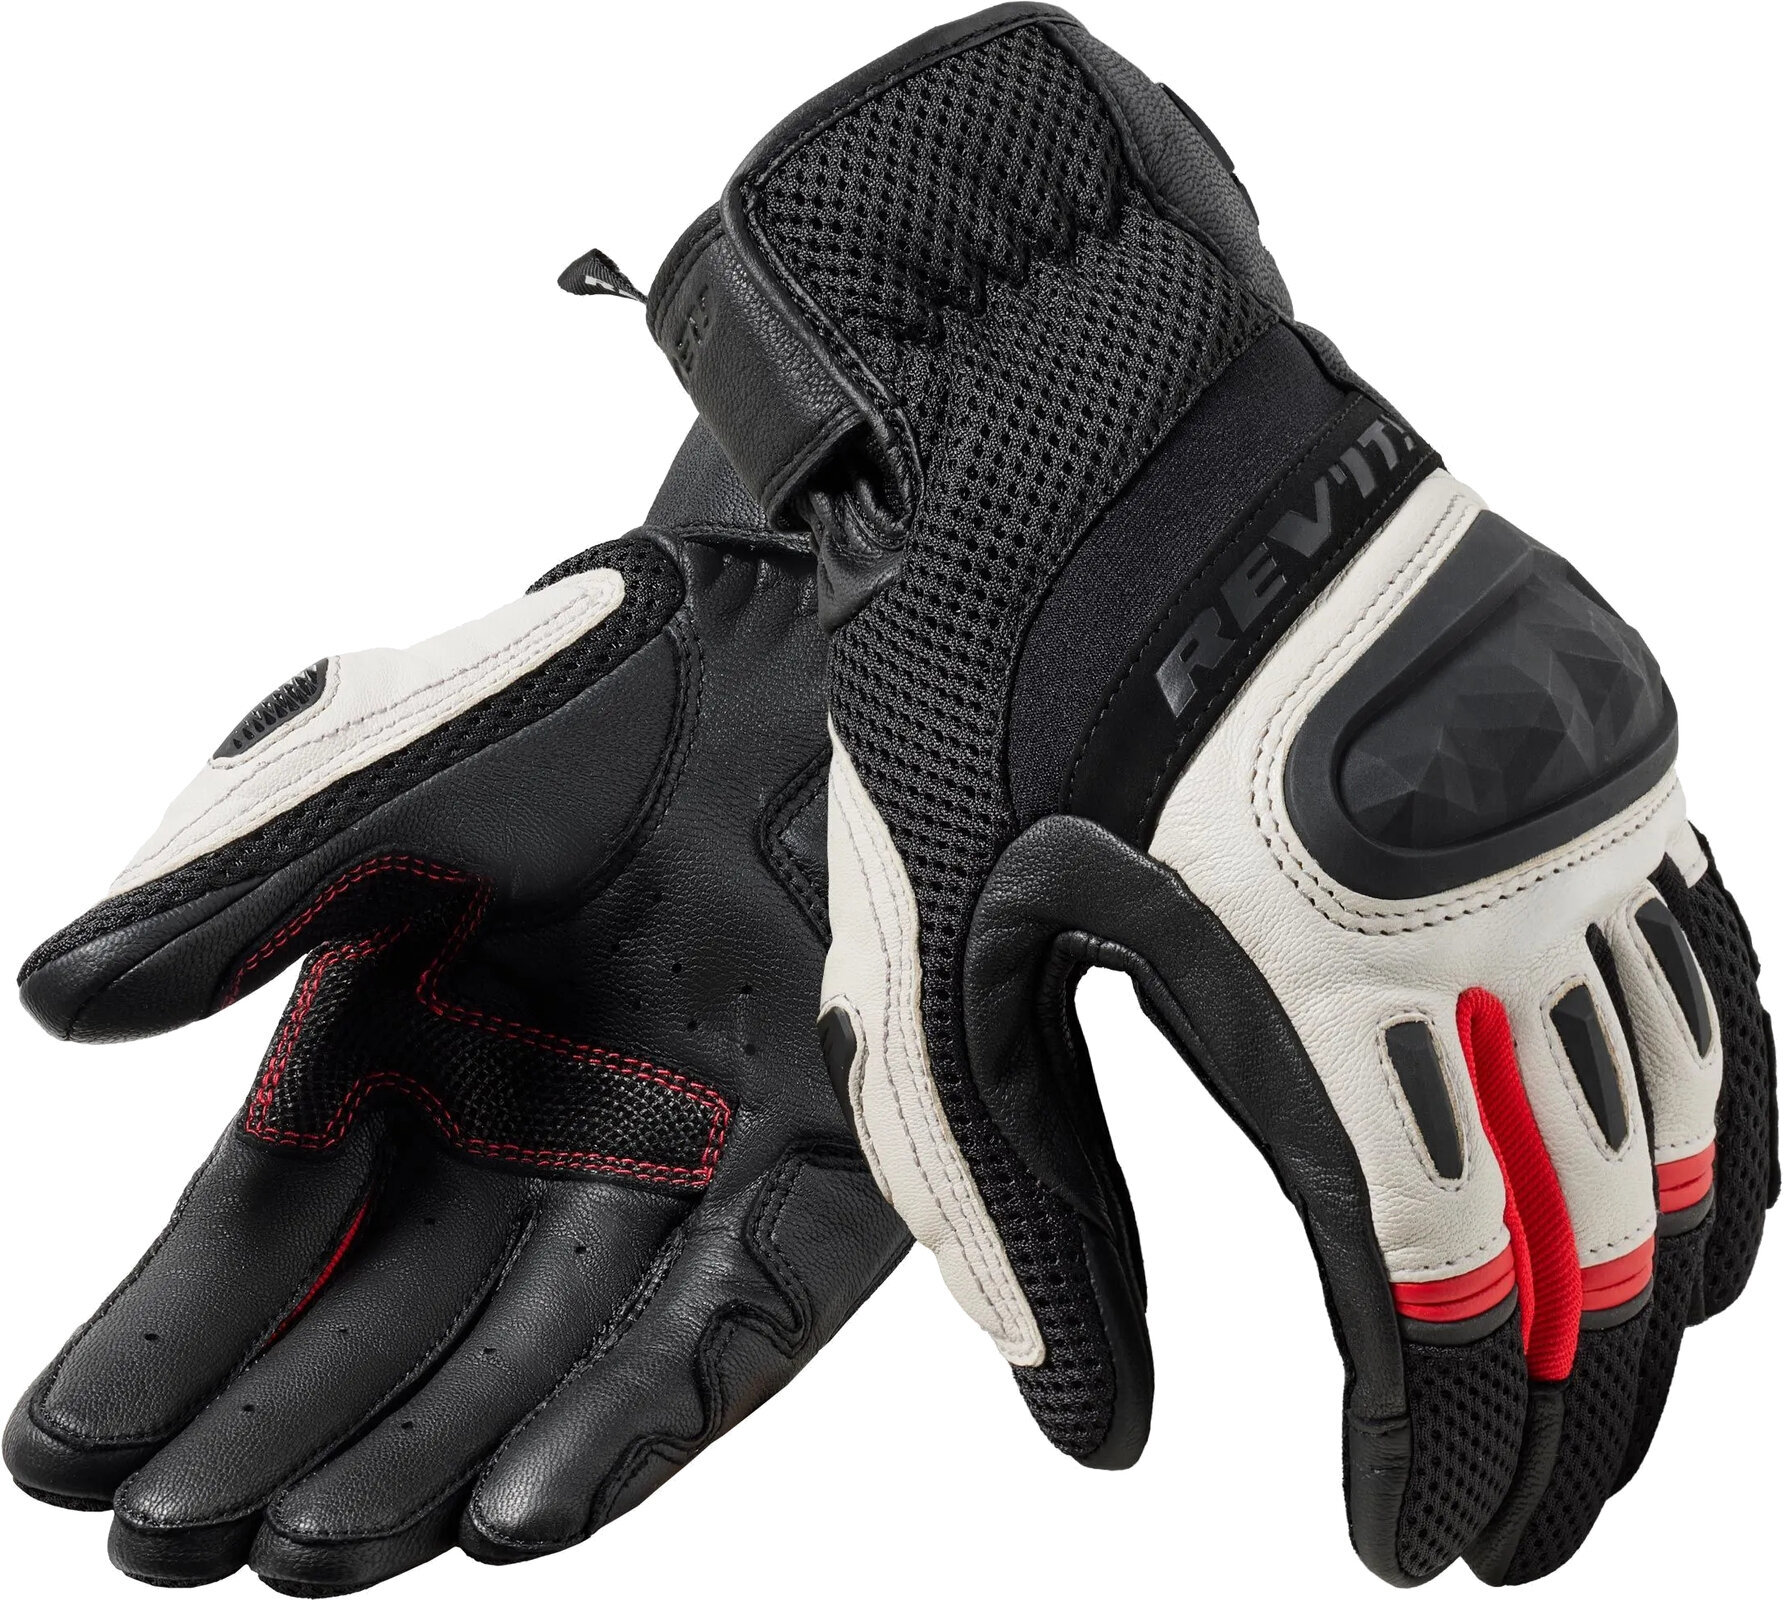 Motorcycle Gloves Rev'it! Gloves Dirt 4 Black/Red 3XL Motorcycle Gloves